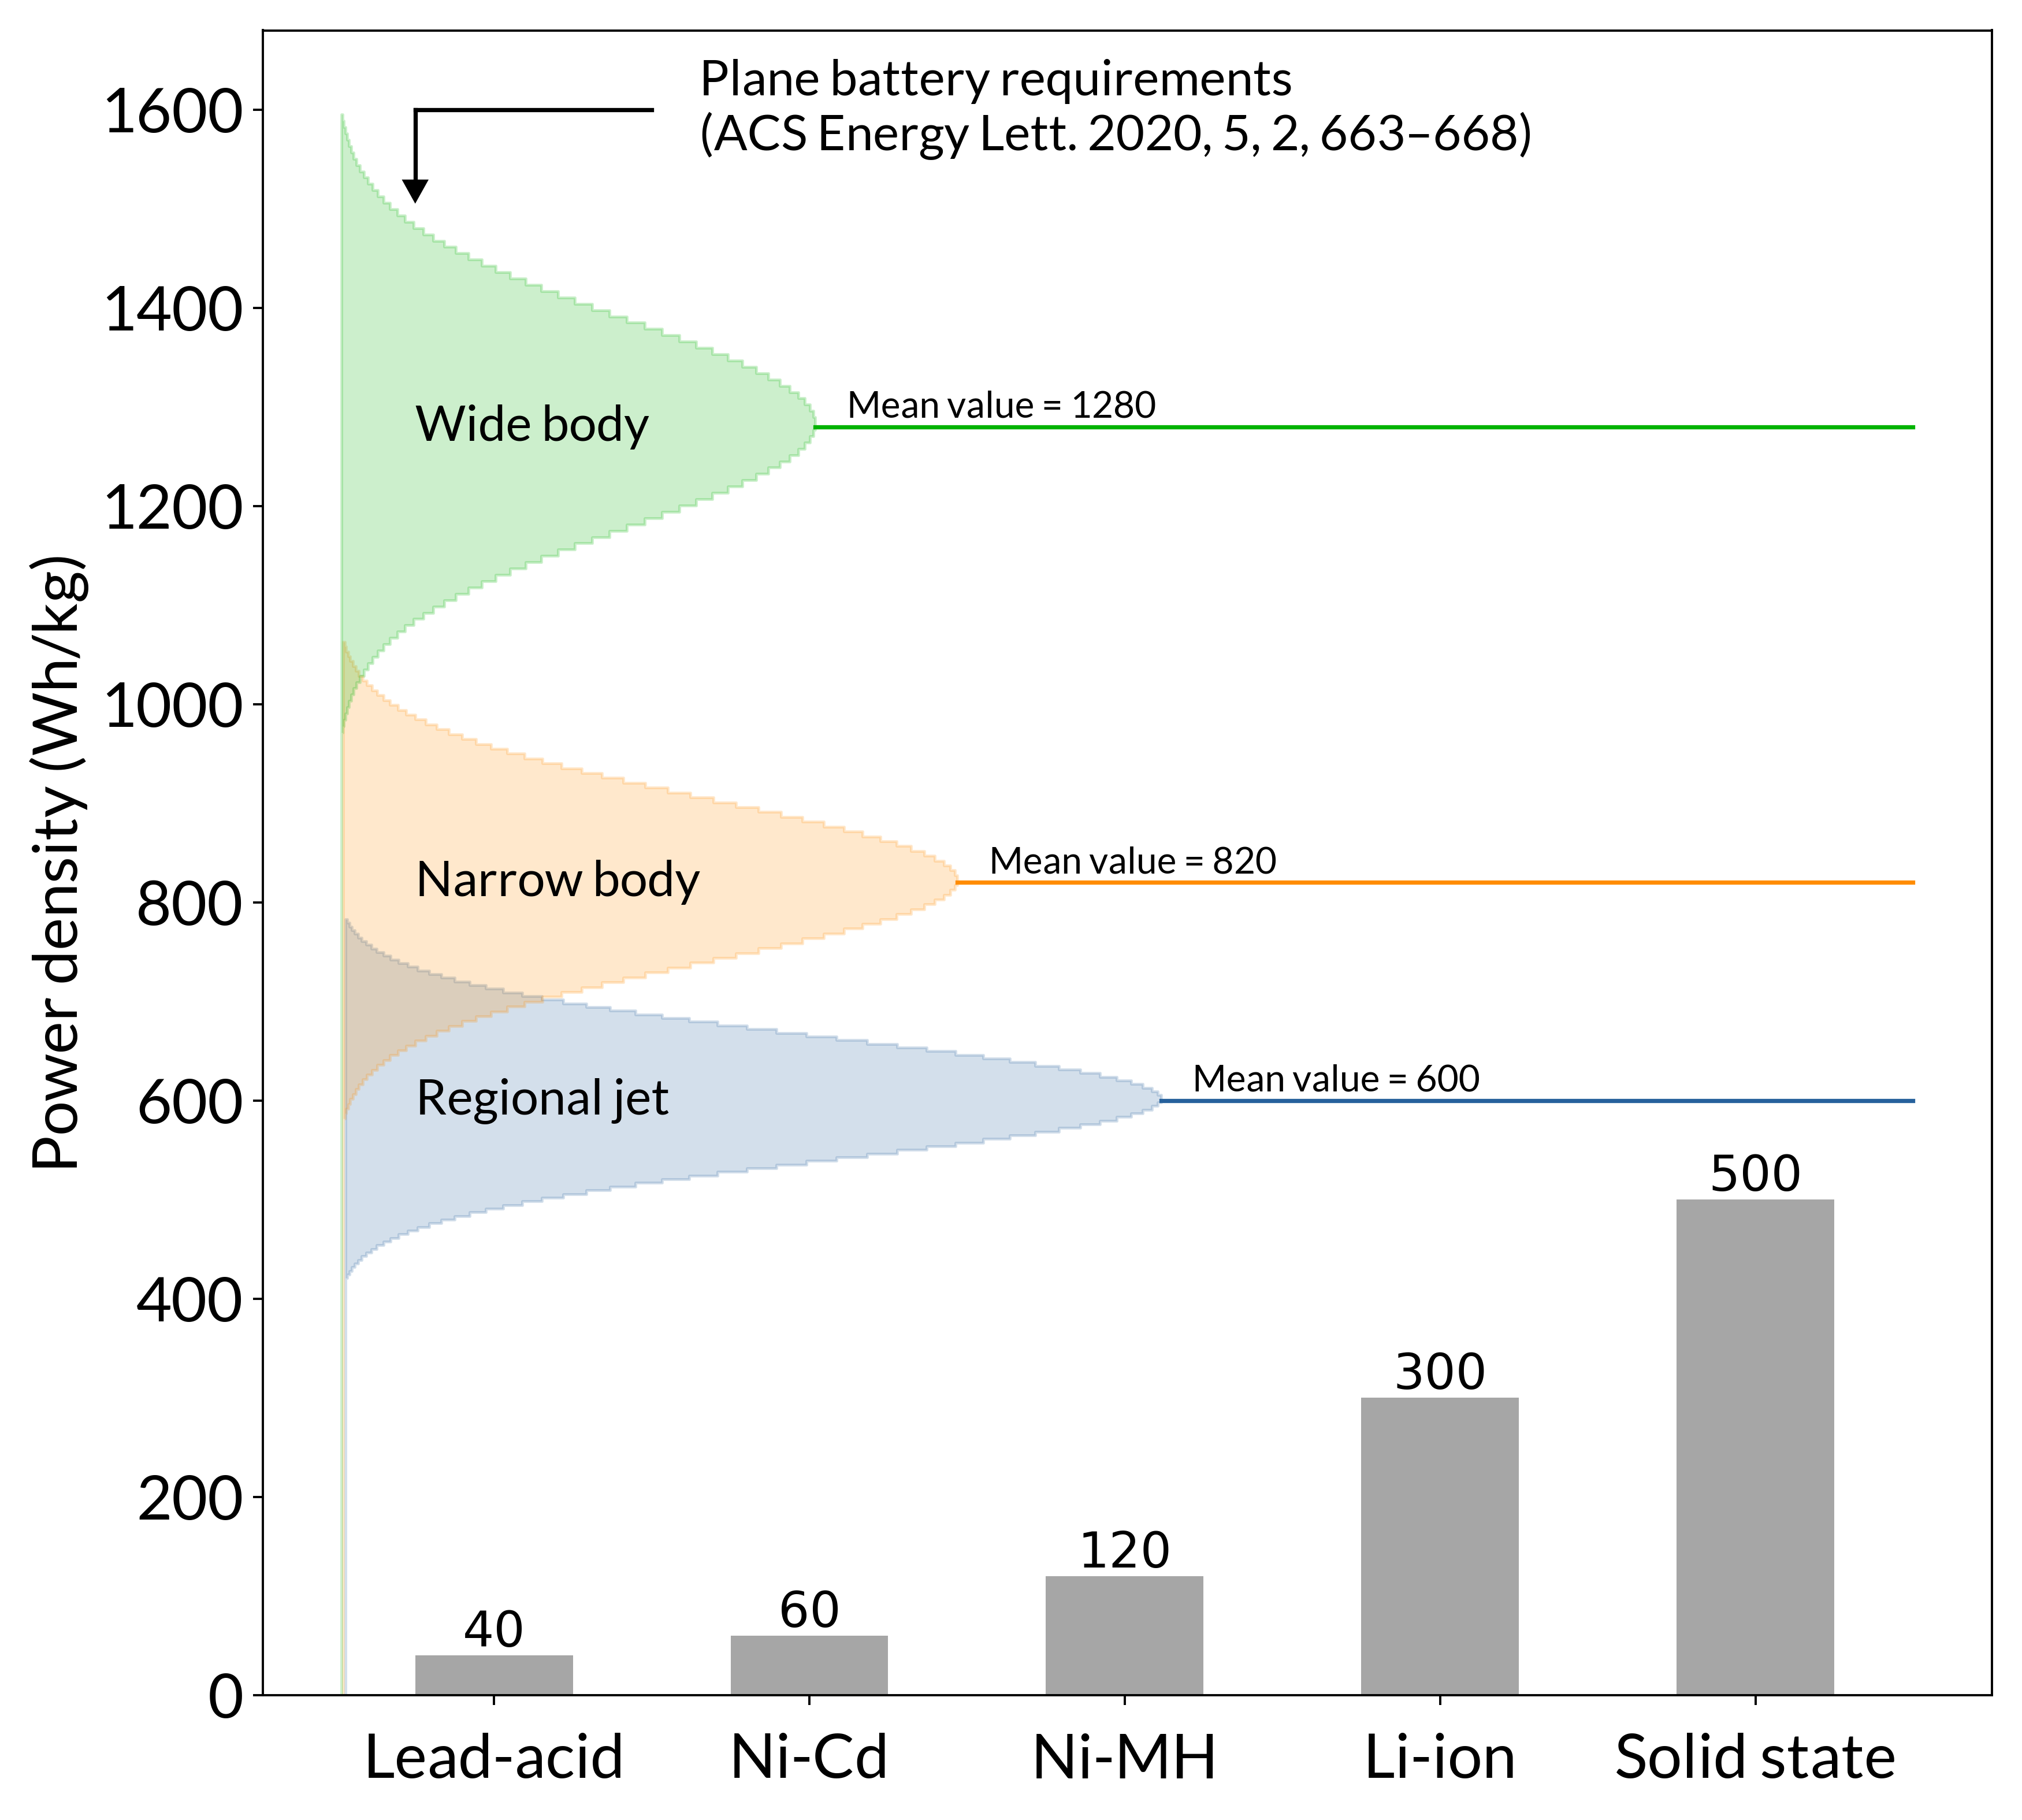 power density of batteries compared to aviation requirements